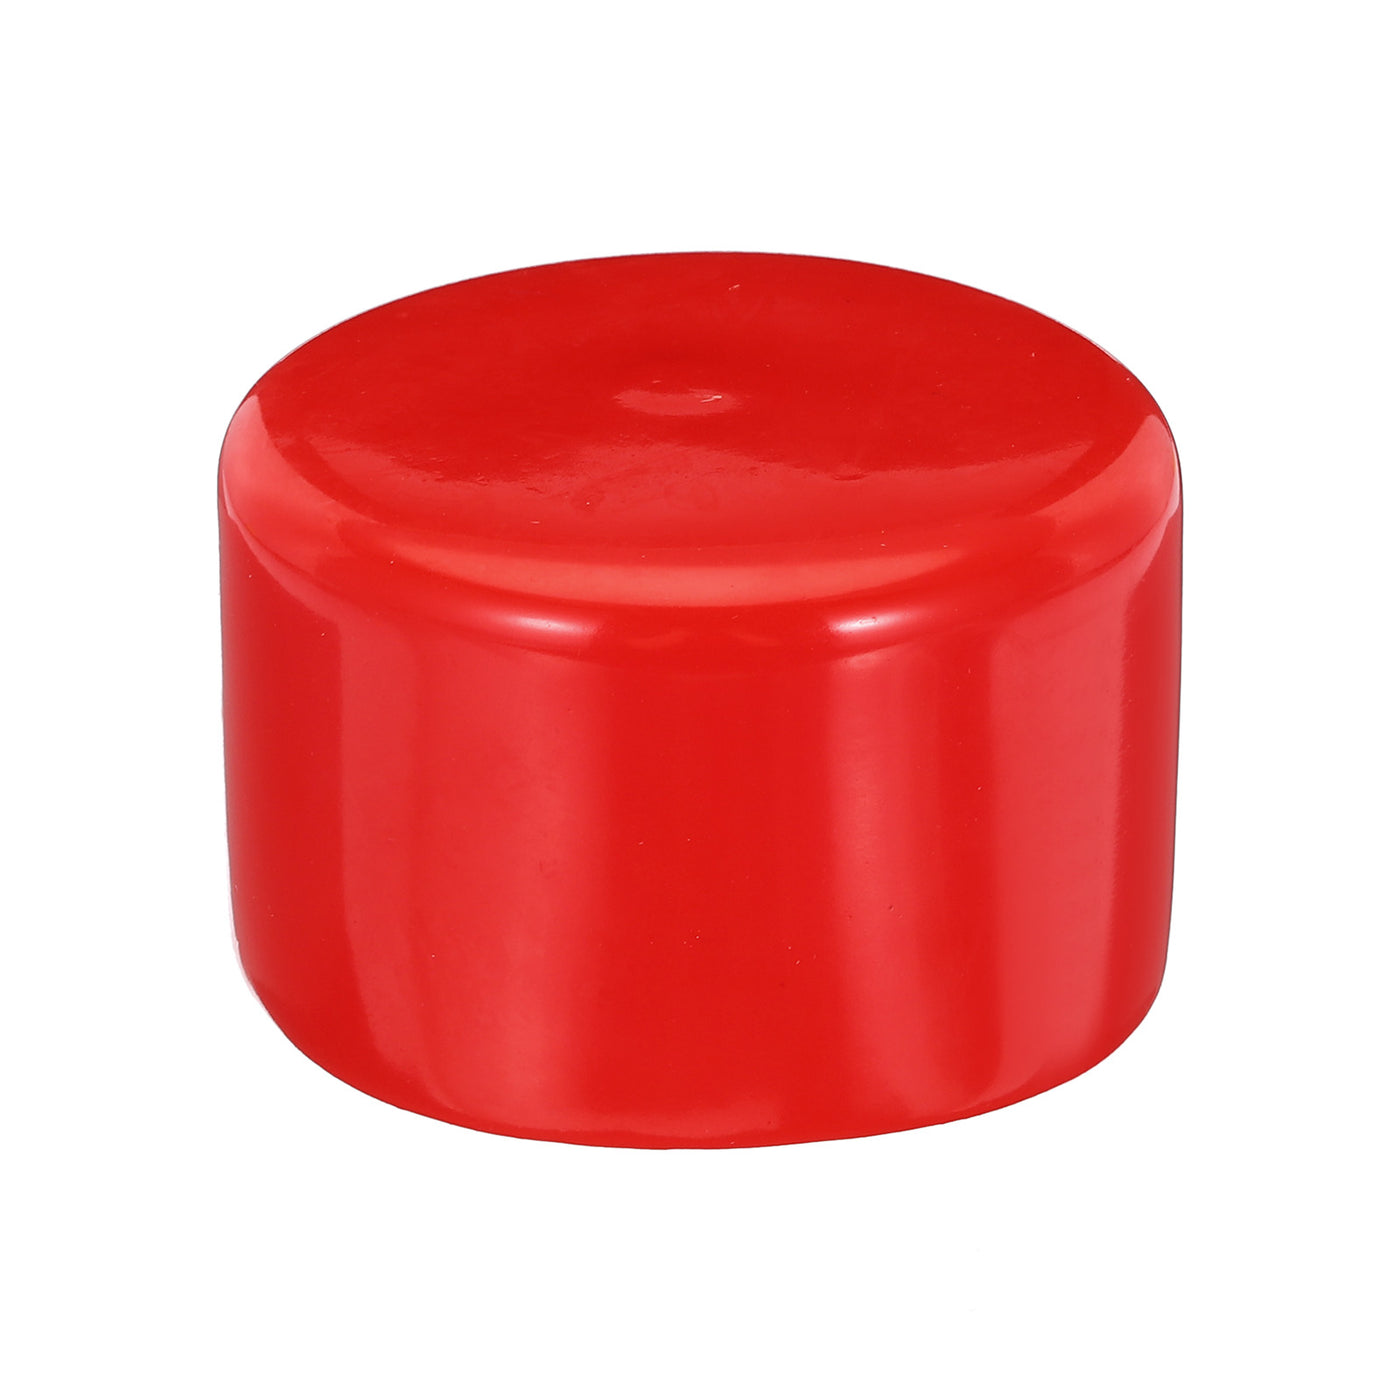 uxcell Uxcell Rubber End Caps 100mm ID Vinyl Round Tube Bolt Cap Cover Screw Thread Protectors Red